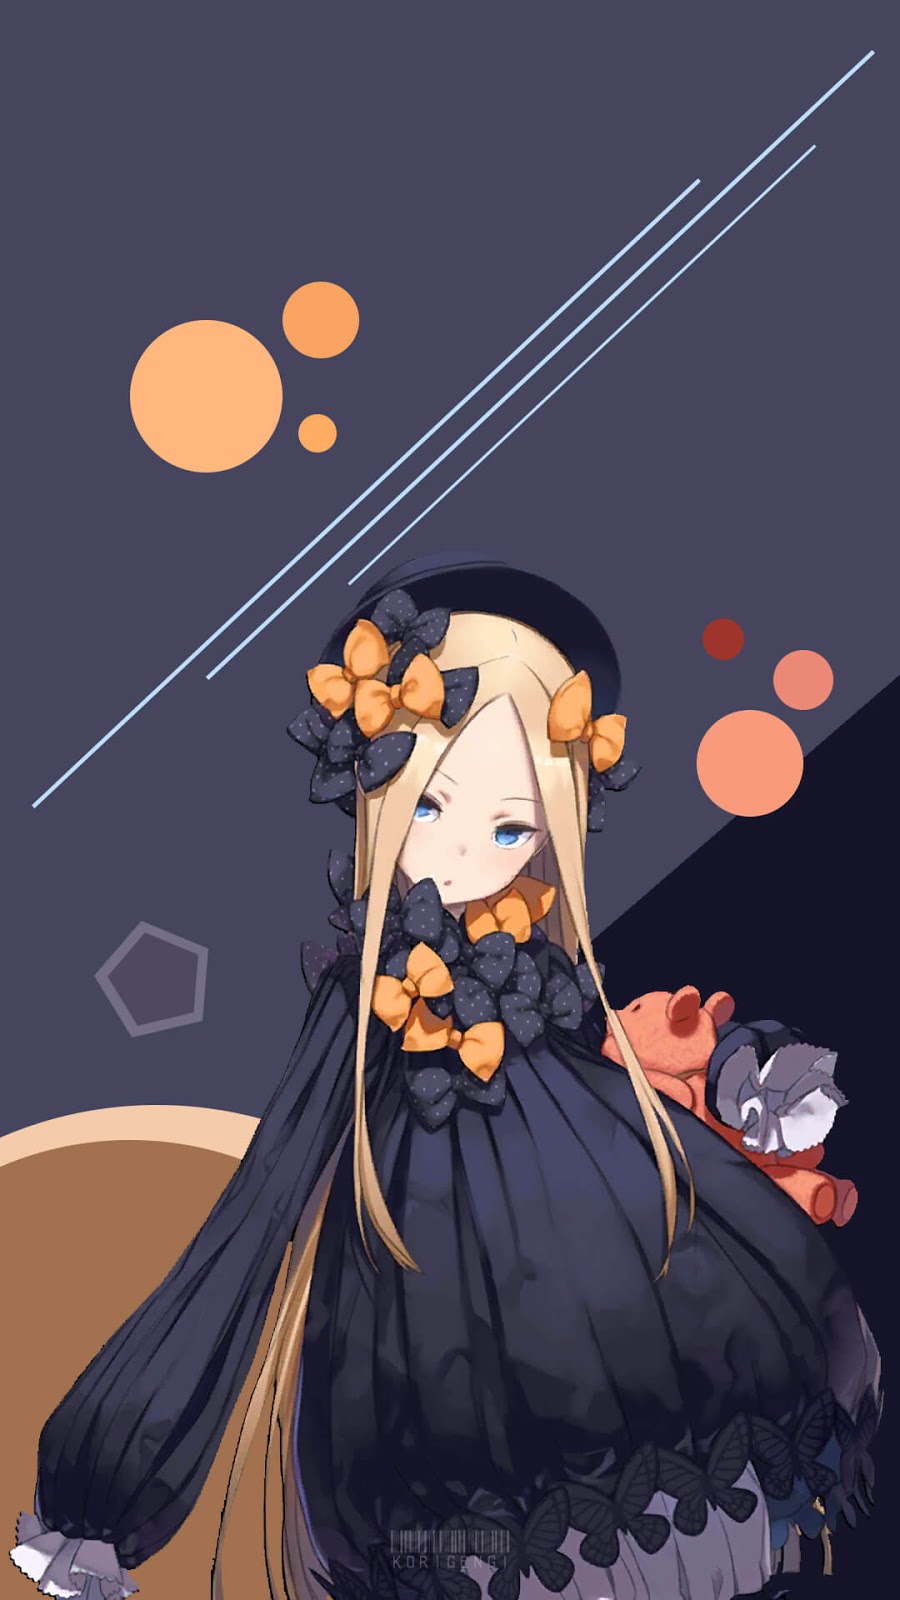 Desktop Wallpaper Abigail Williams Foreigner FateGrand Order Blonde  Anime Girl Hd Image Picture Background 41b1a3